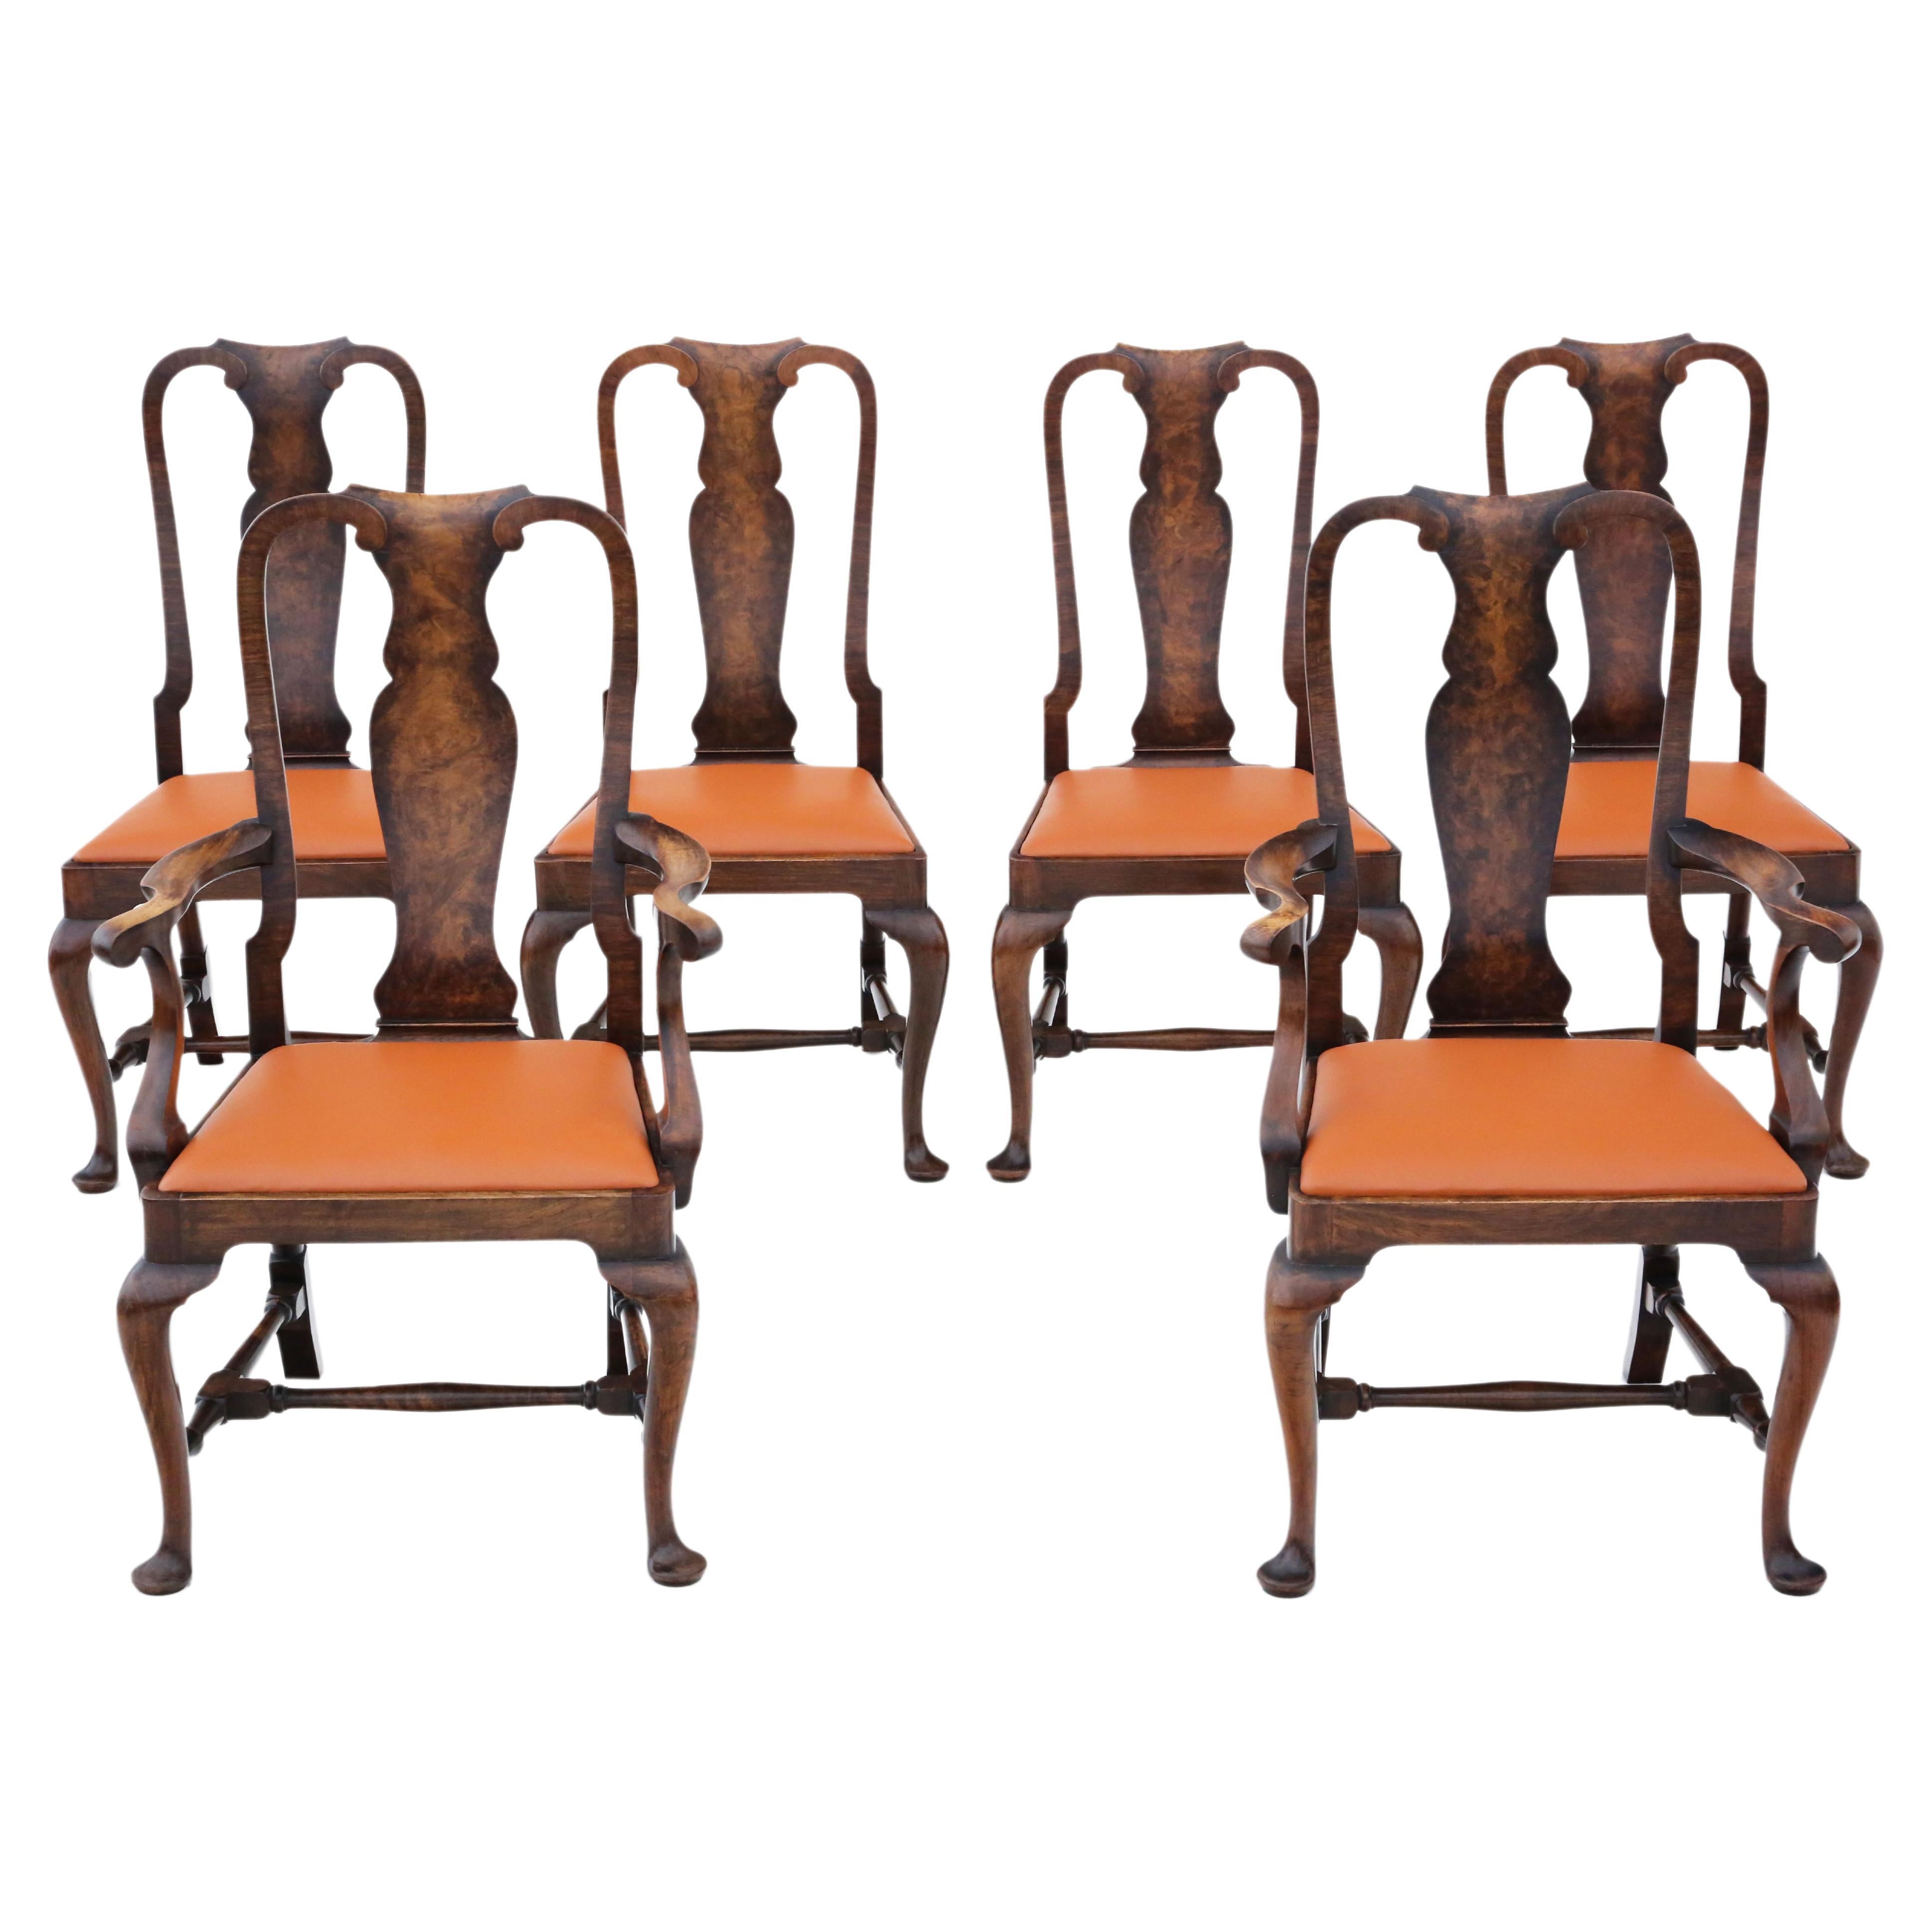 Antique Set of 6 Queen Anne Revival Burr Walnut Dining Chairs from circa 1910 -  For Sale